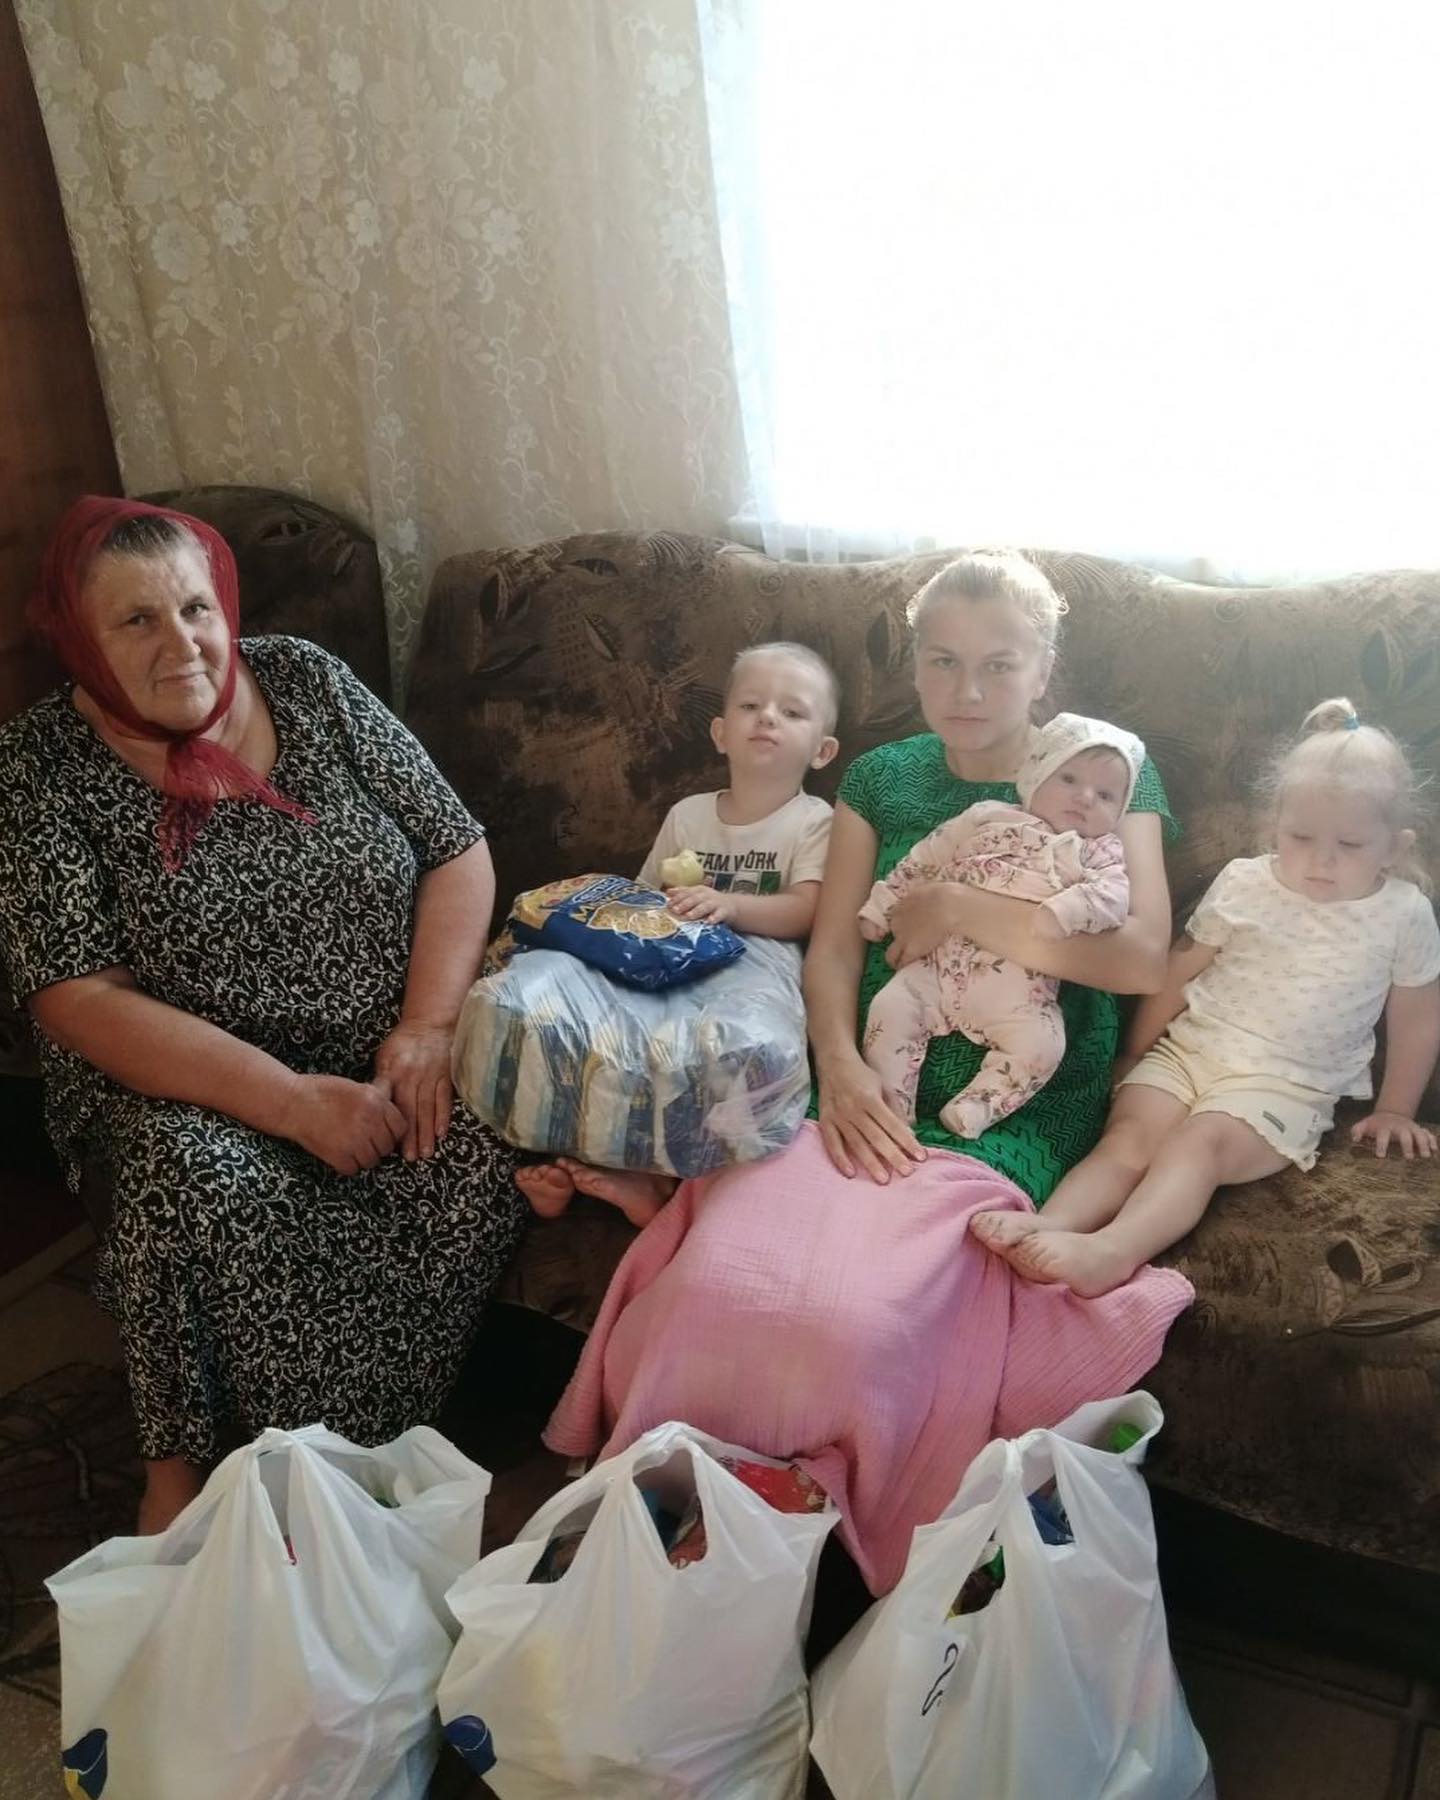 A group of people sitting on a couch with bags of groceries.